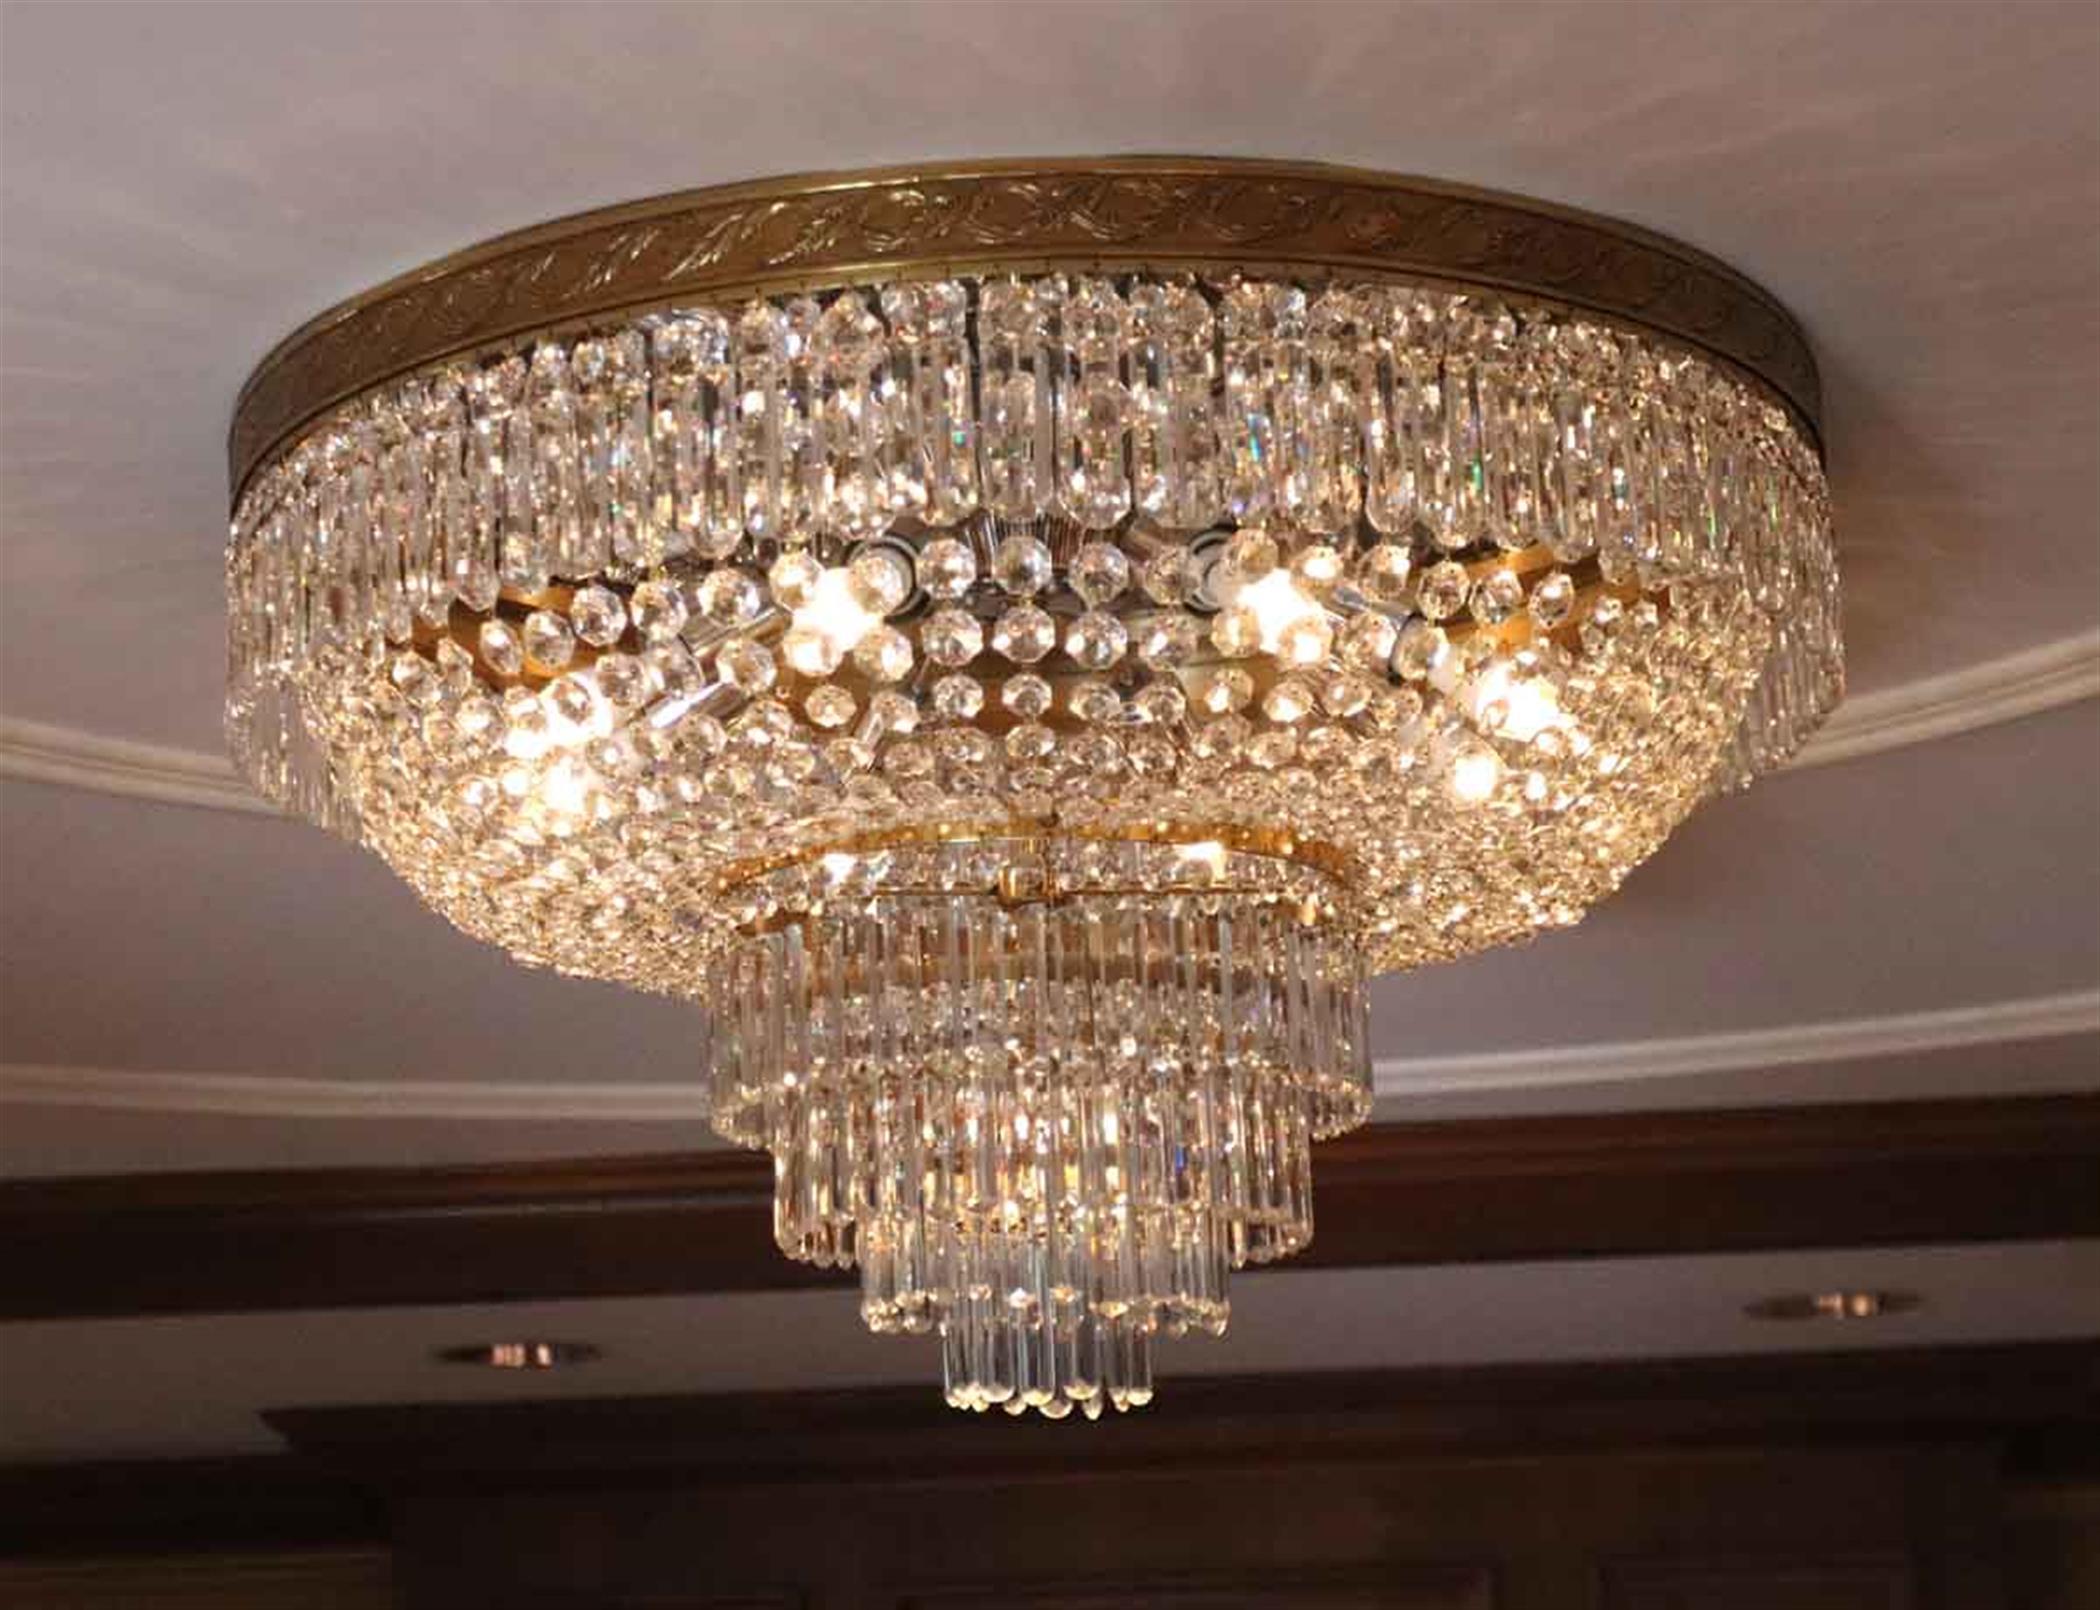 1980s Waldorf Astoria Hotel Chandelier Duke of Windsor Suite Flush Mount Crystal In Good Condition For Sale In New York, NY